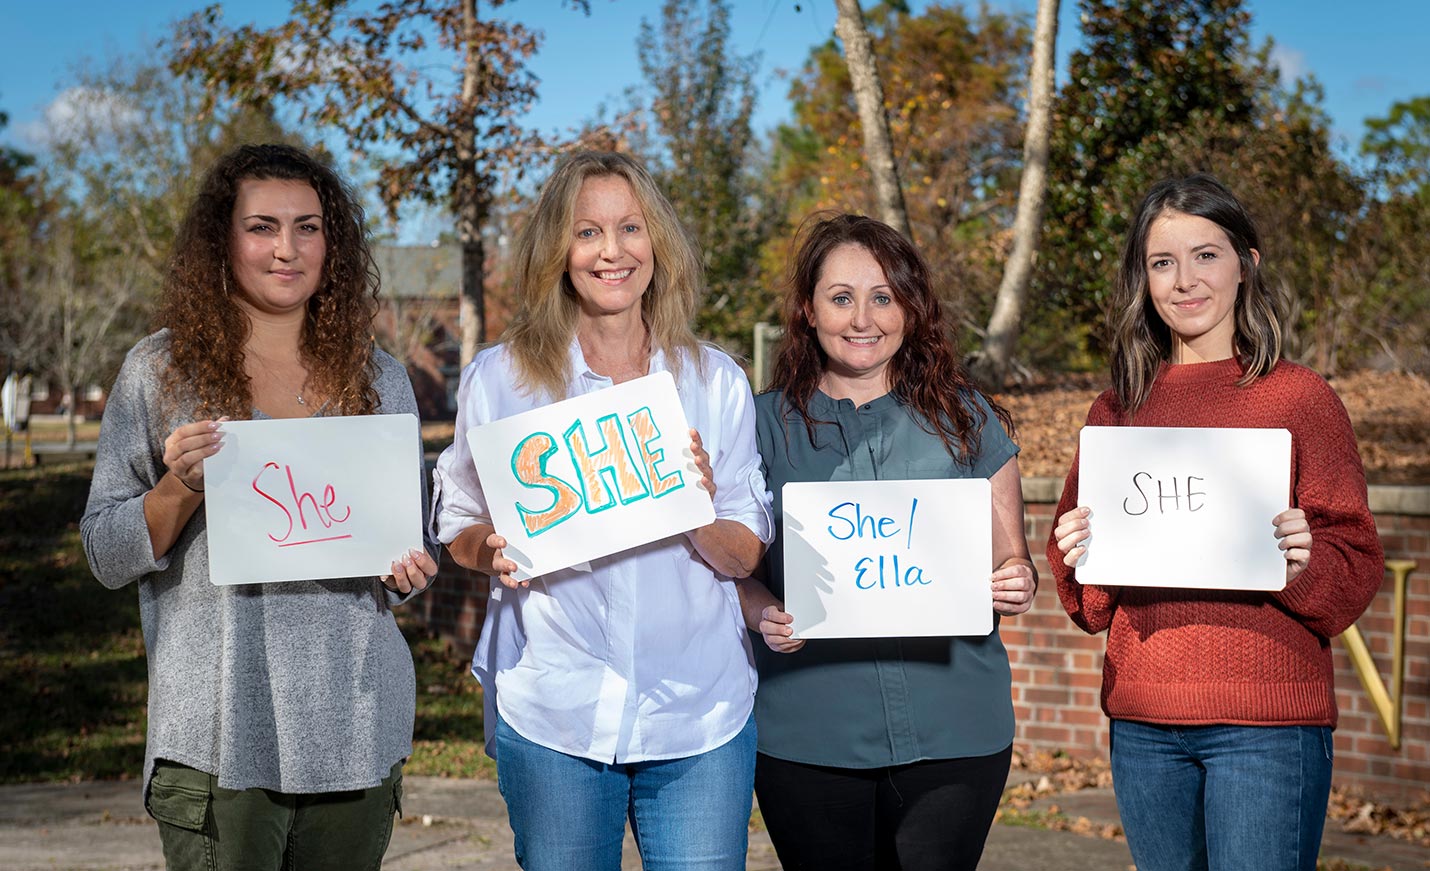 Four women holding signs indicating their preferred pronoun is She; one added the Spanish word ella